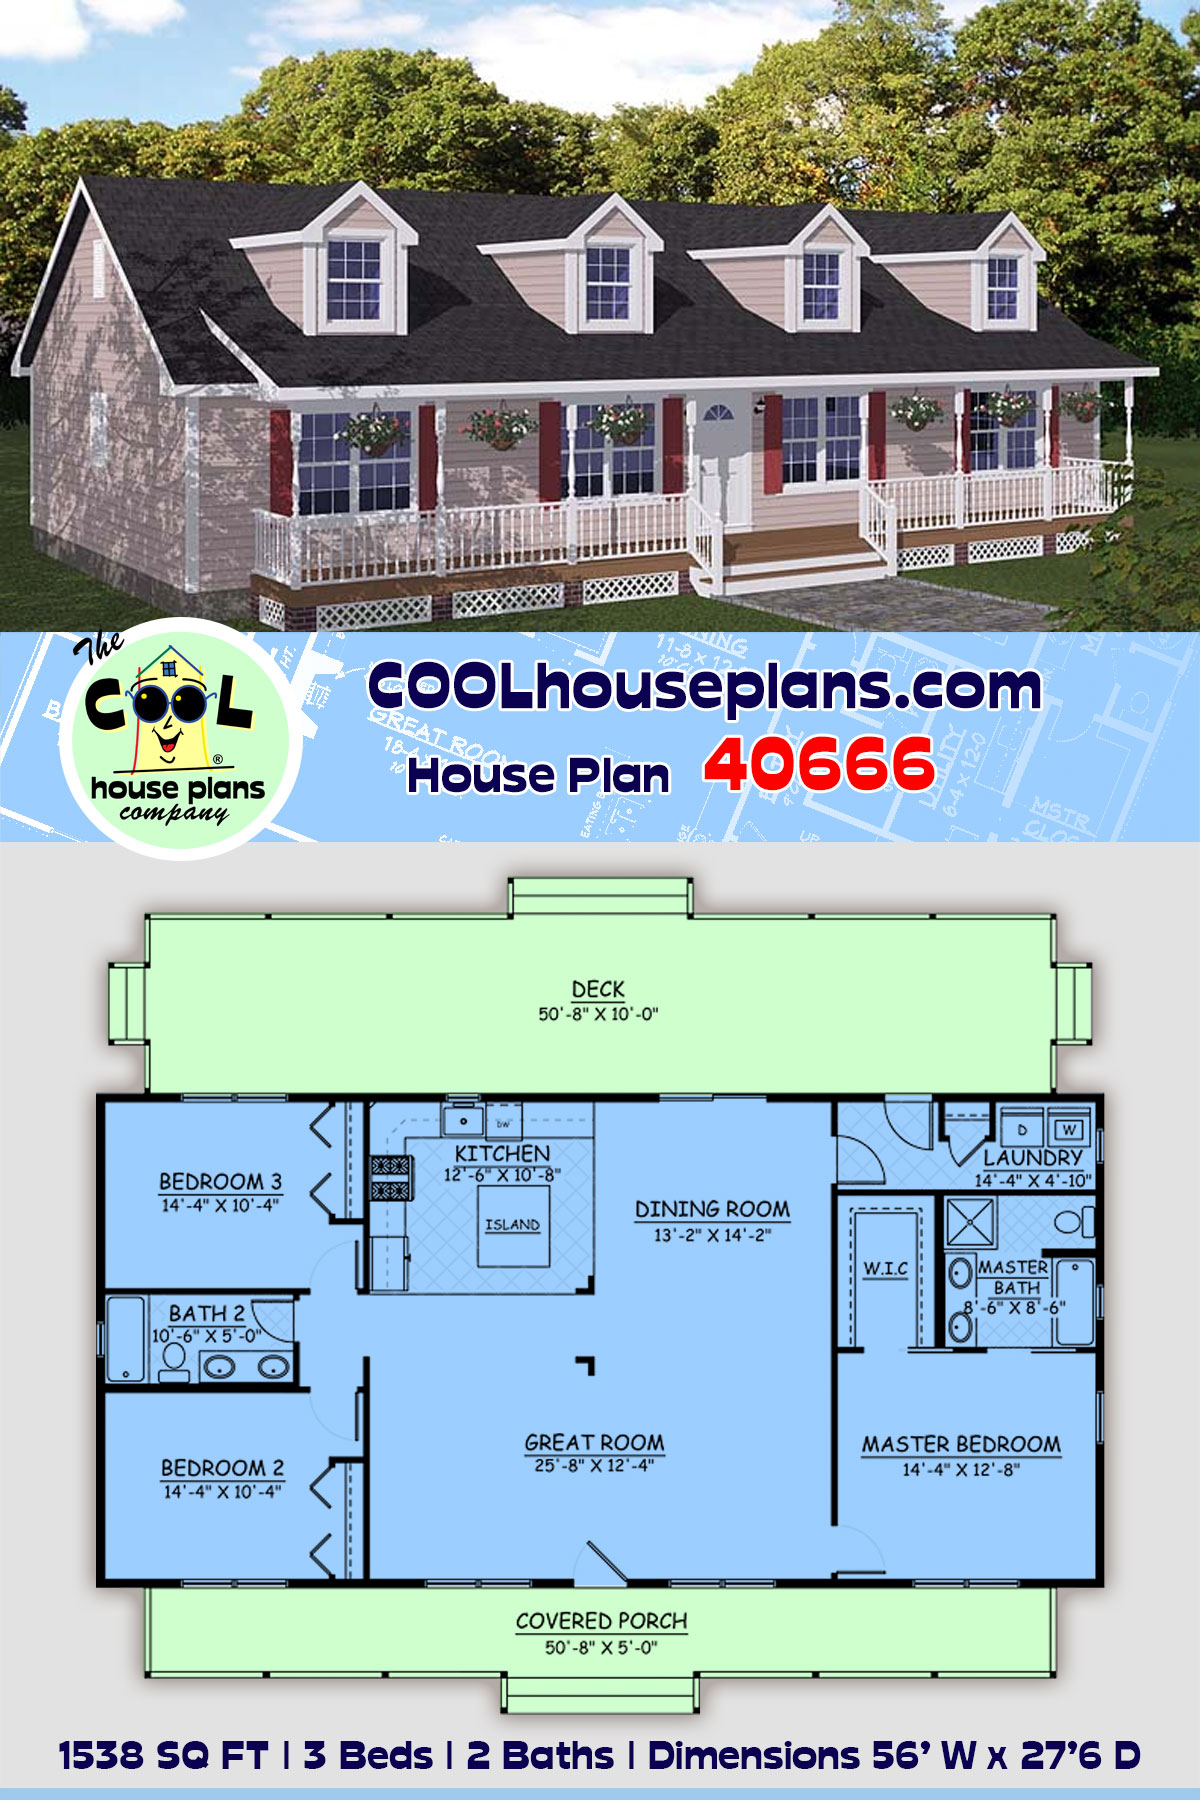 Country, Ranch, Southern House Plan 40666 with 3 Beds, 2 Baths